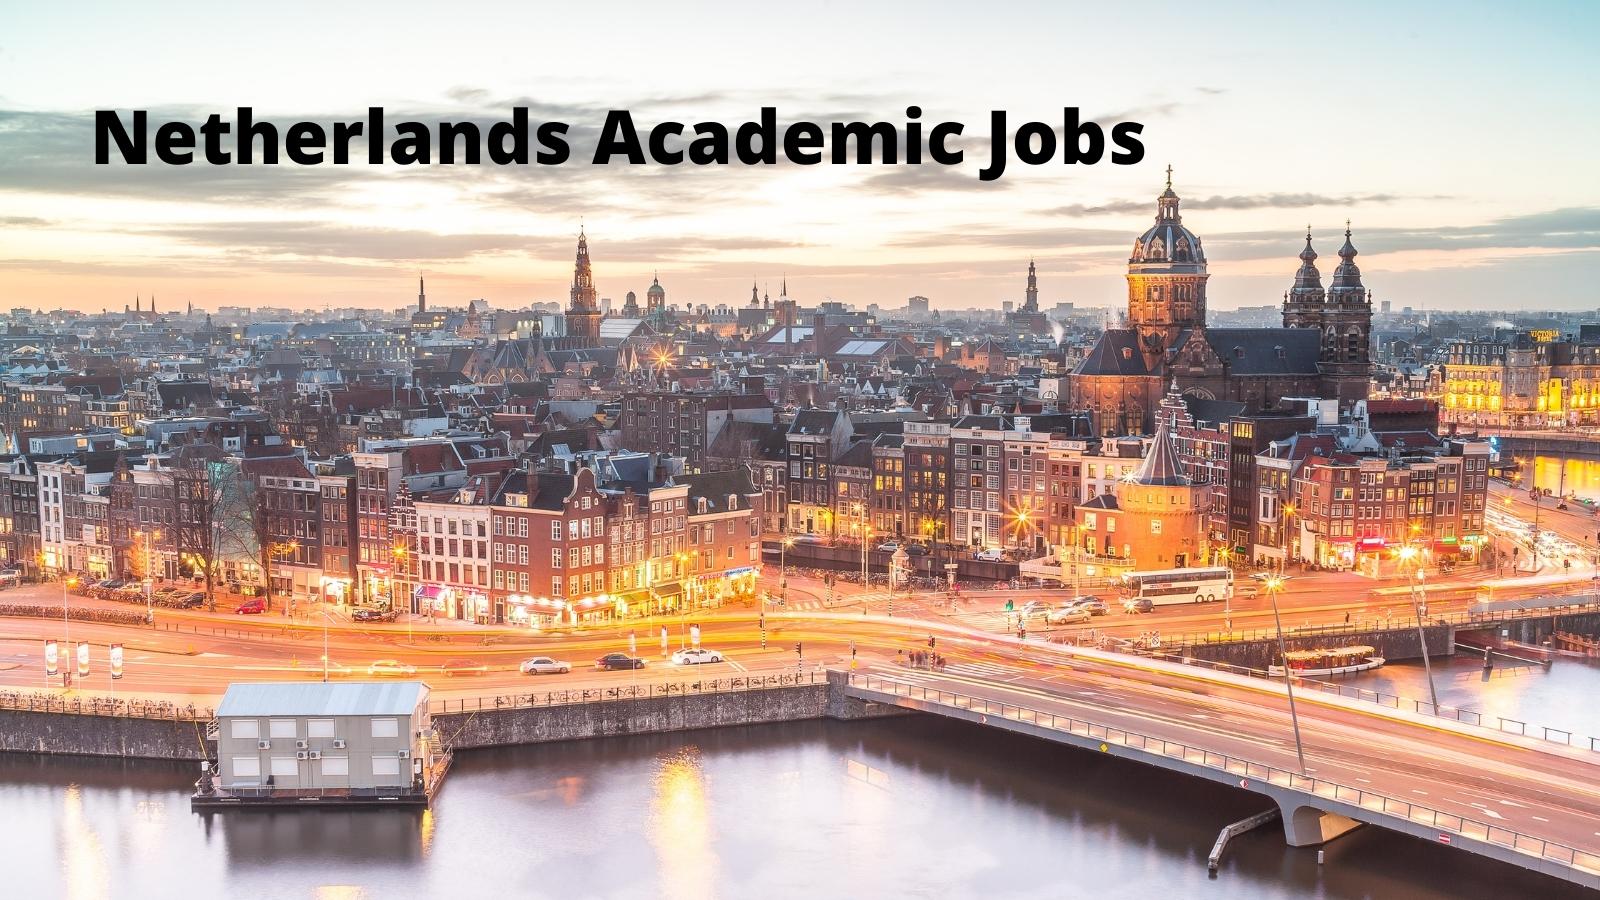 Netherlands Academic Jobs Vacancies - Image Aerial view of Amsterdam in the evening